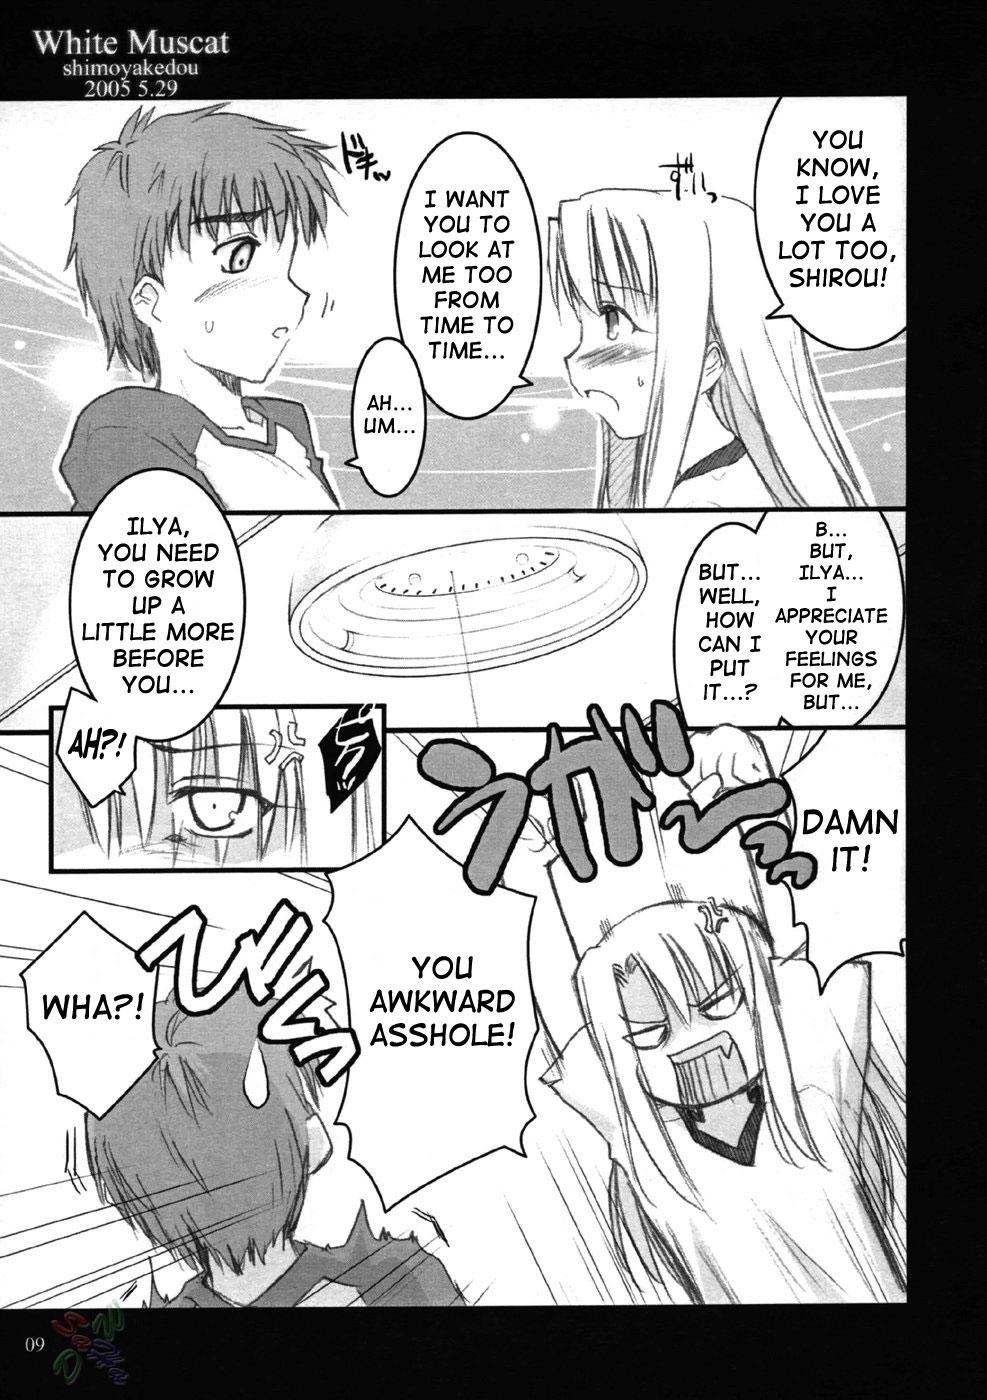 Doggystyle Porn White Muscat - Fate stay night Fat - Page 8